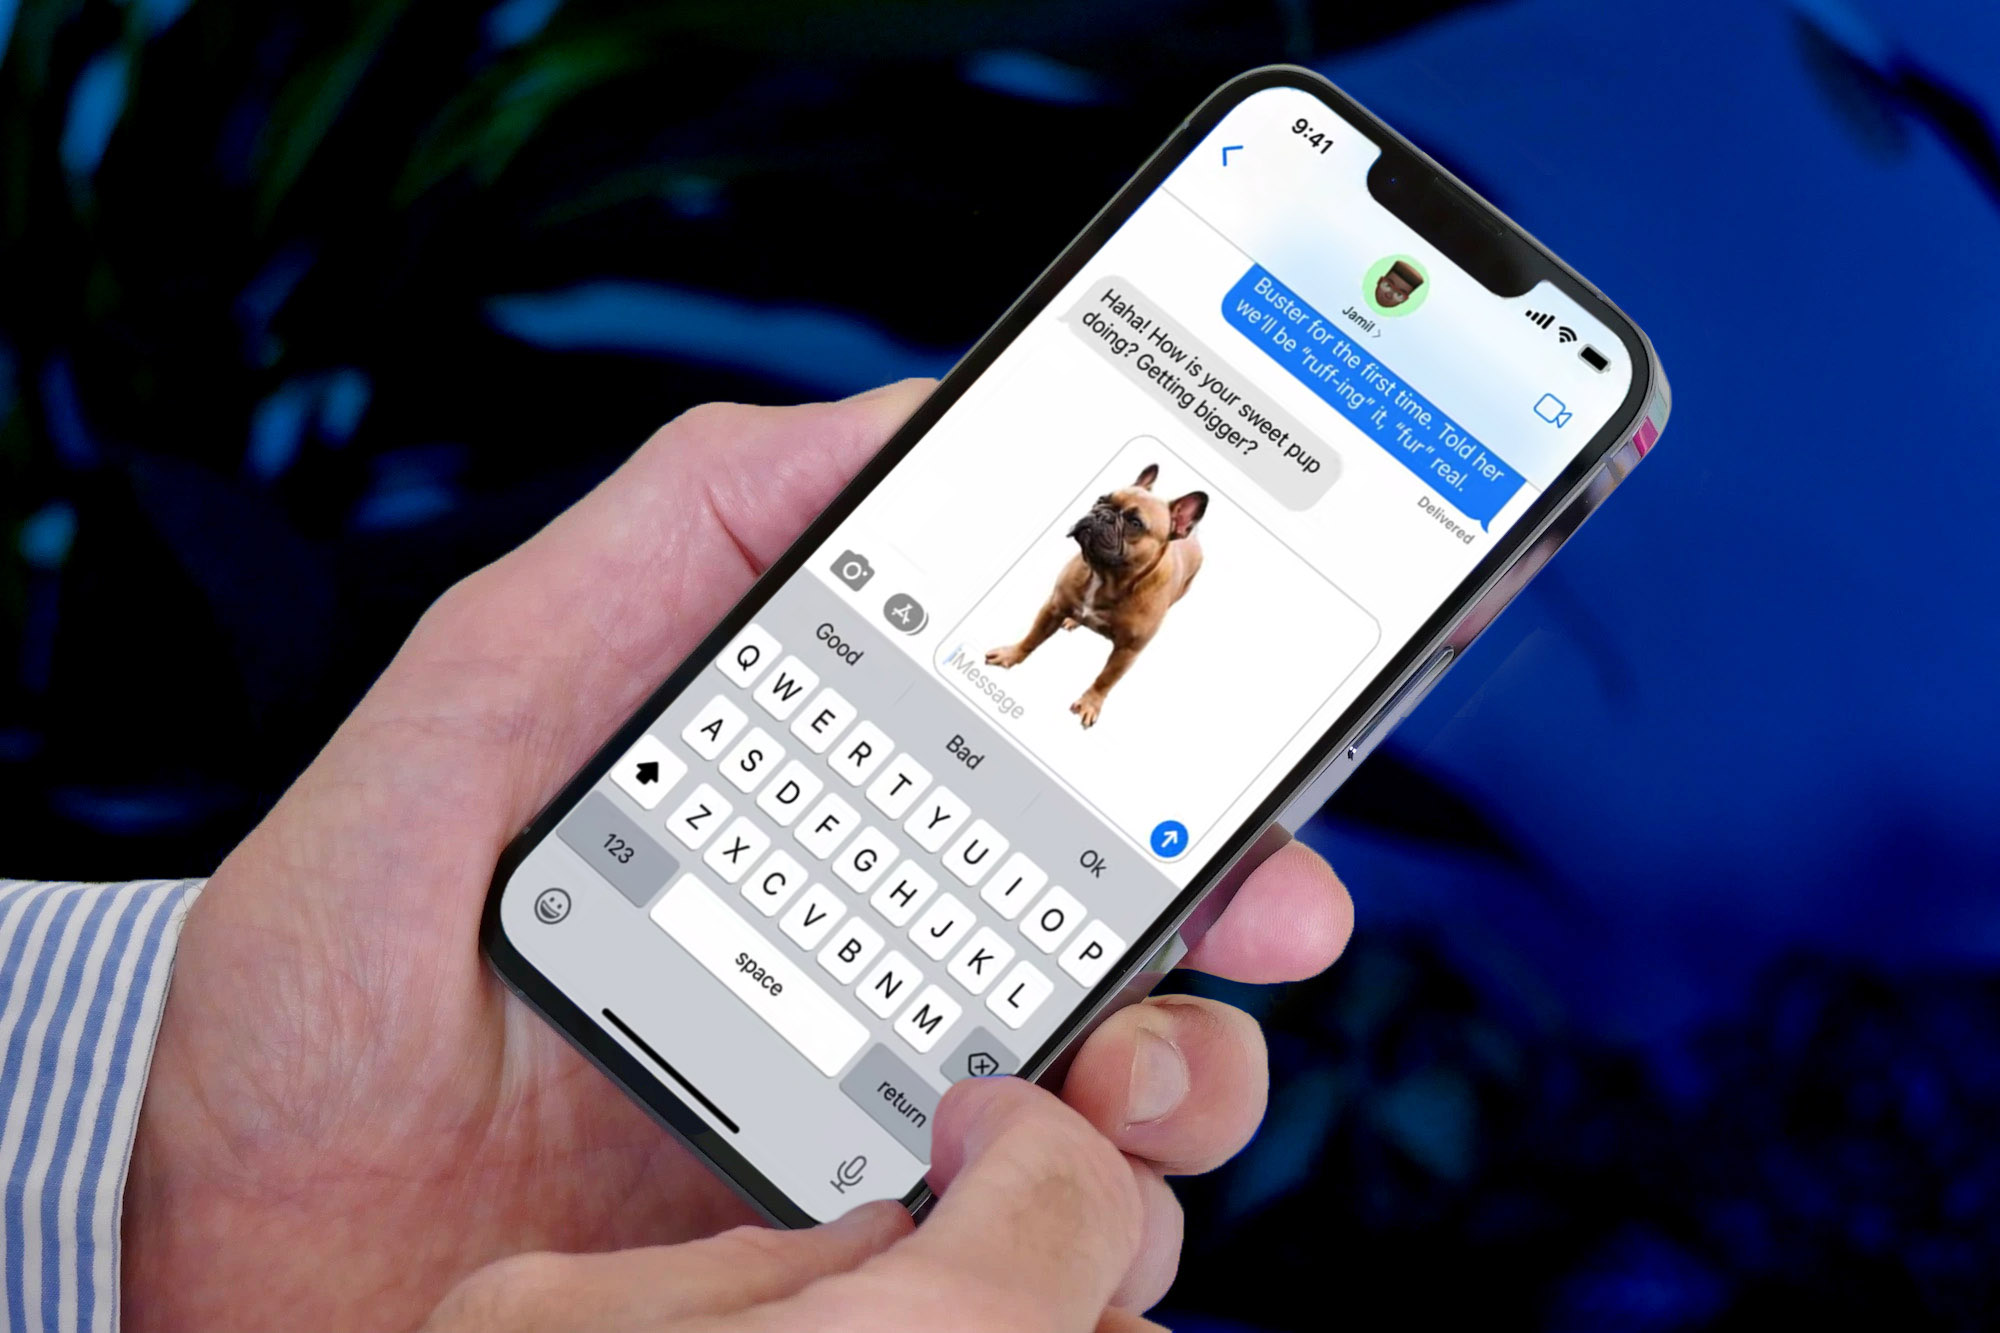 The image background remover feature from iOS 16 being used on a photo of a dog.